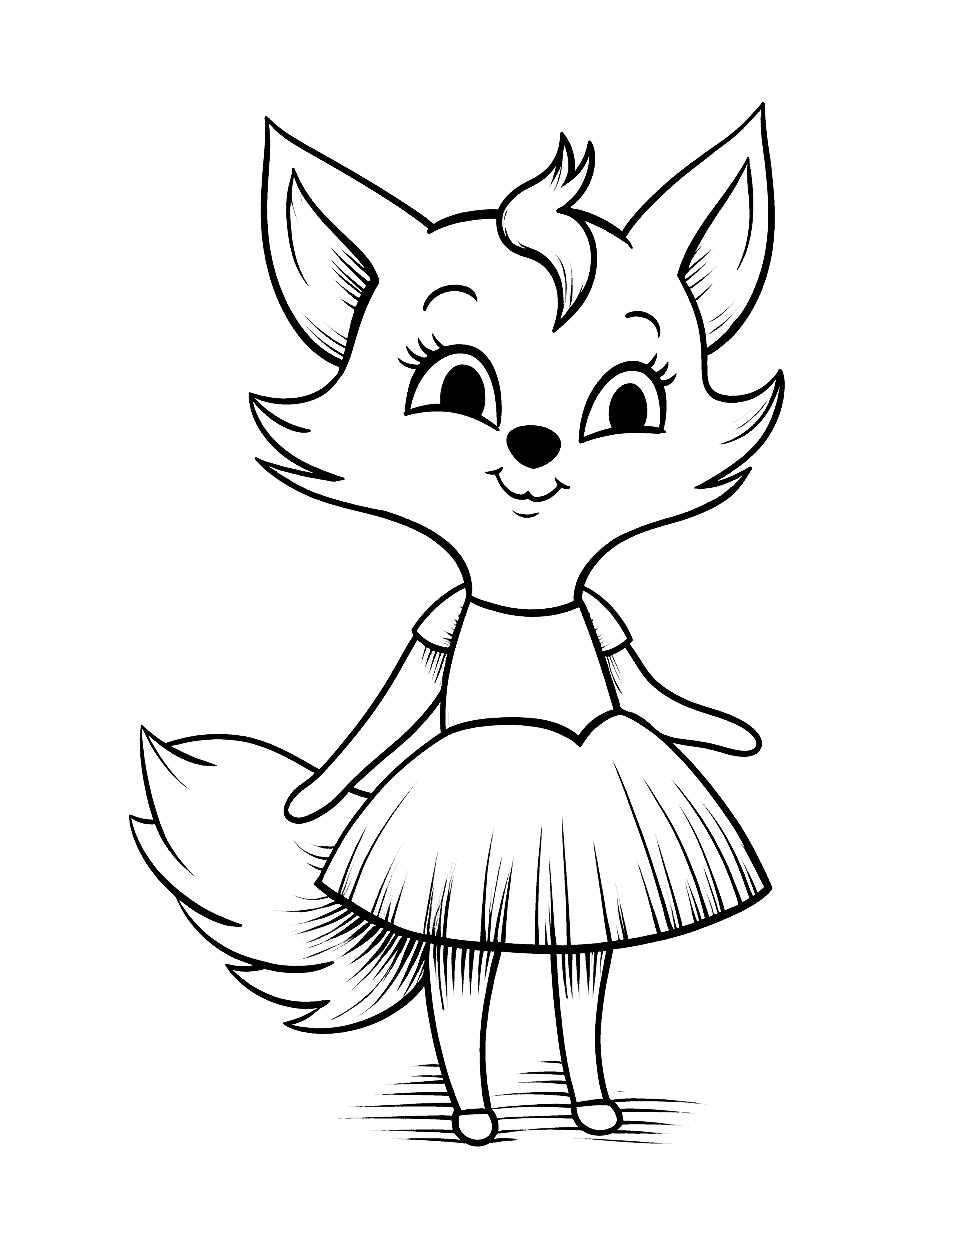 Ballerina Fox Coloring Page - A graceful fox in a tutu, practicing its ballet moves.